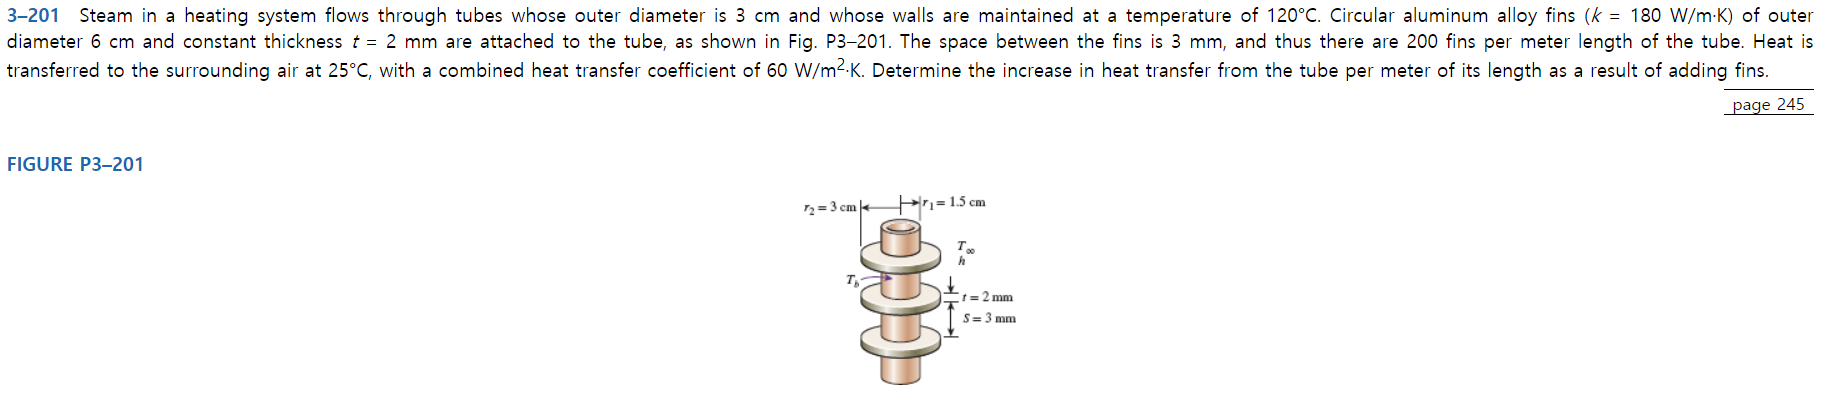 3-201 Steam in a heating system flows through tubes whose outer diameter is 3 cm and whose walls are maintained at a temperature of 120°C. Circular aluminum alloy fins (k = 180 W/m K) of outer
diameter 6 cm and constant thickness t = 2 mm are attached to the tube, as shown in Fig. P3-201. The space between the fins is 3 mm, and thus there are 200 fins per meter length of the tube. Heat is
transferred to the surrounding air at 25°C, with a combined heat transfer coefficient of 60 W/m2-K. Determine the increase in heat transfer from the tube per meter of its length
as a result of adding fins.
page 245
FIGURE P3-201
r= 1.5 cm
2-3 cm
t=2 mm
S 3 mm
